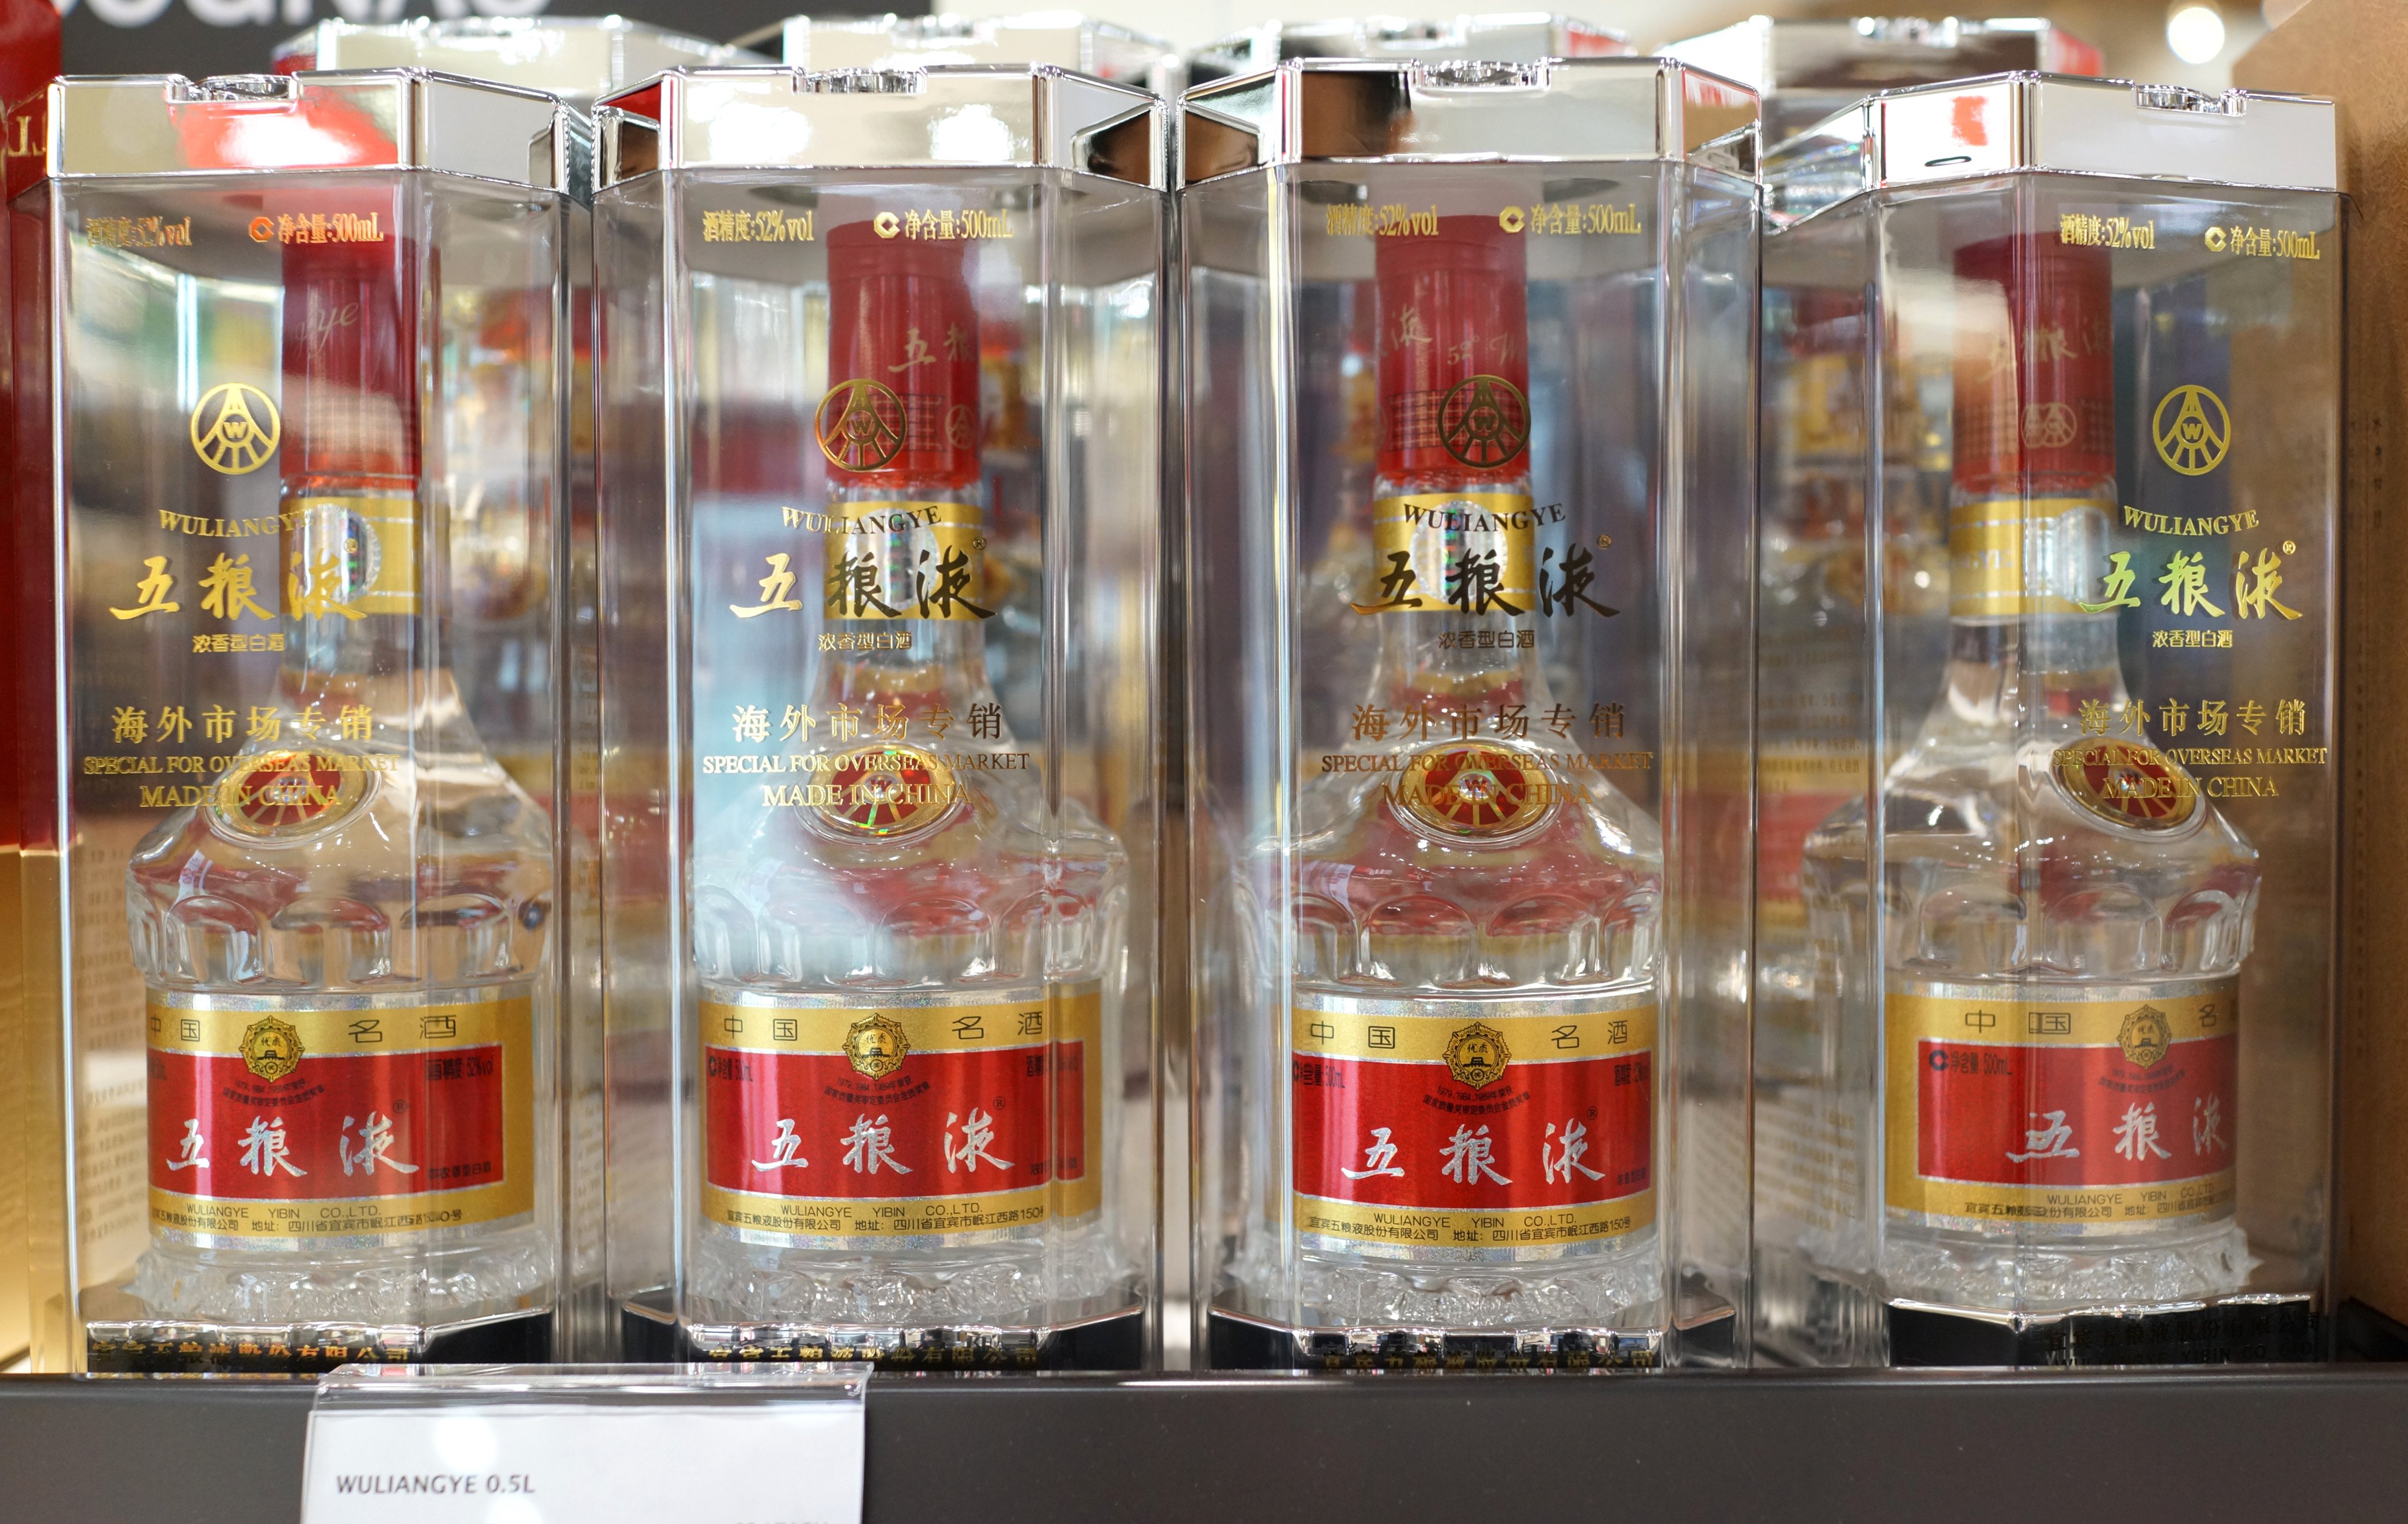 Zhang bought 2.56 million shares in fiery liquor producer Wuliangye, Kweichow Moutai’s biggest rival, in the third quarter. Photo: Shutterstock